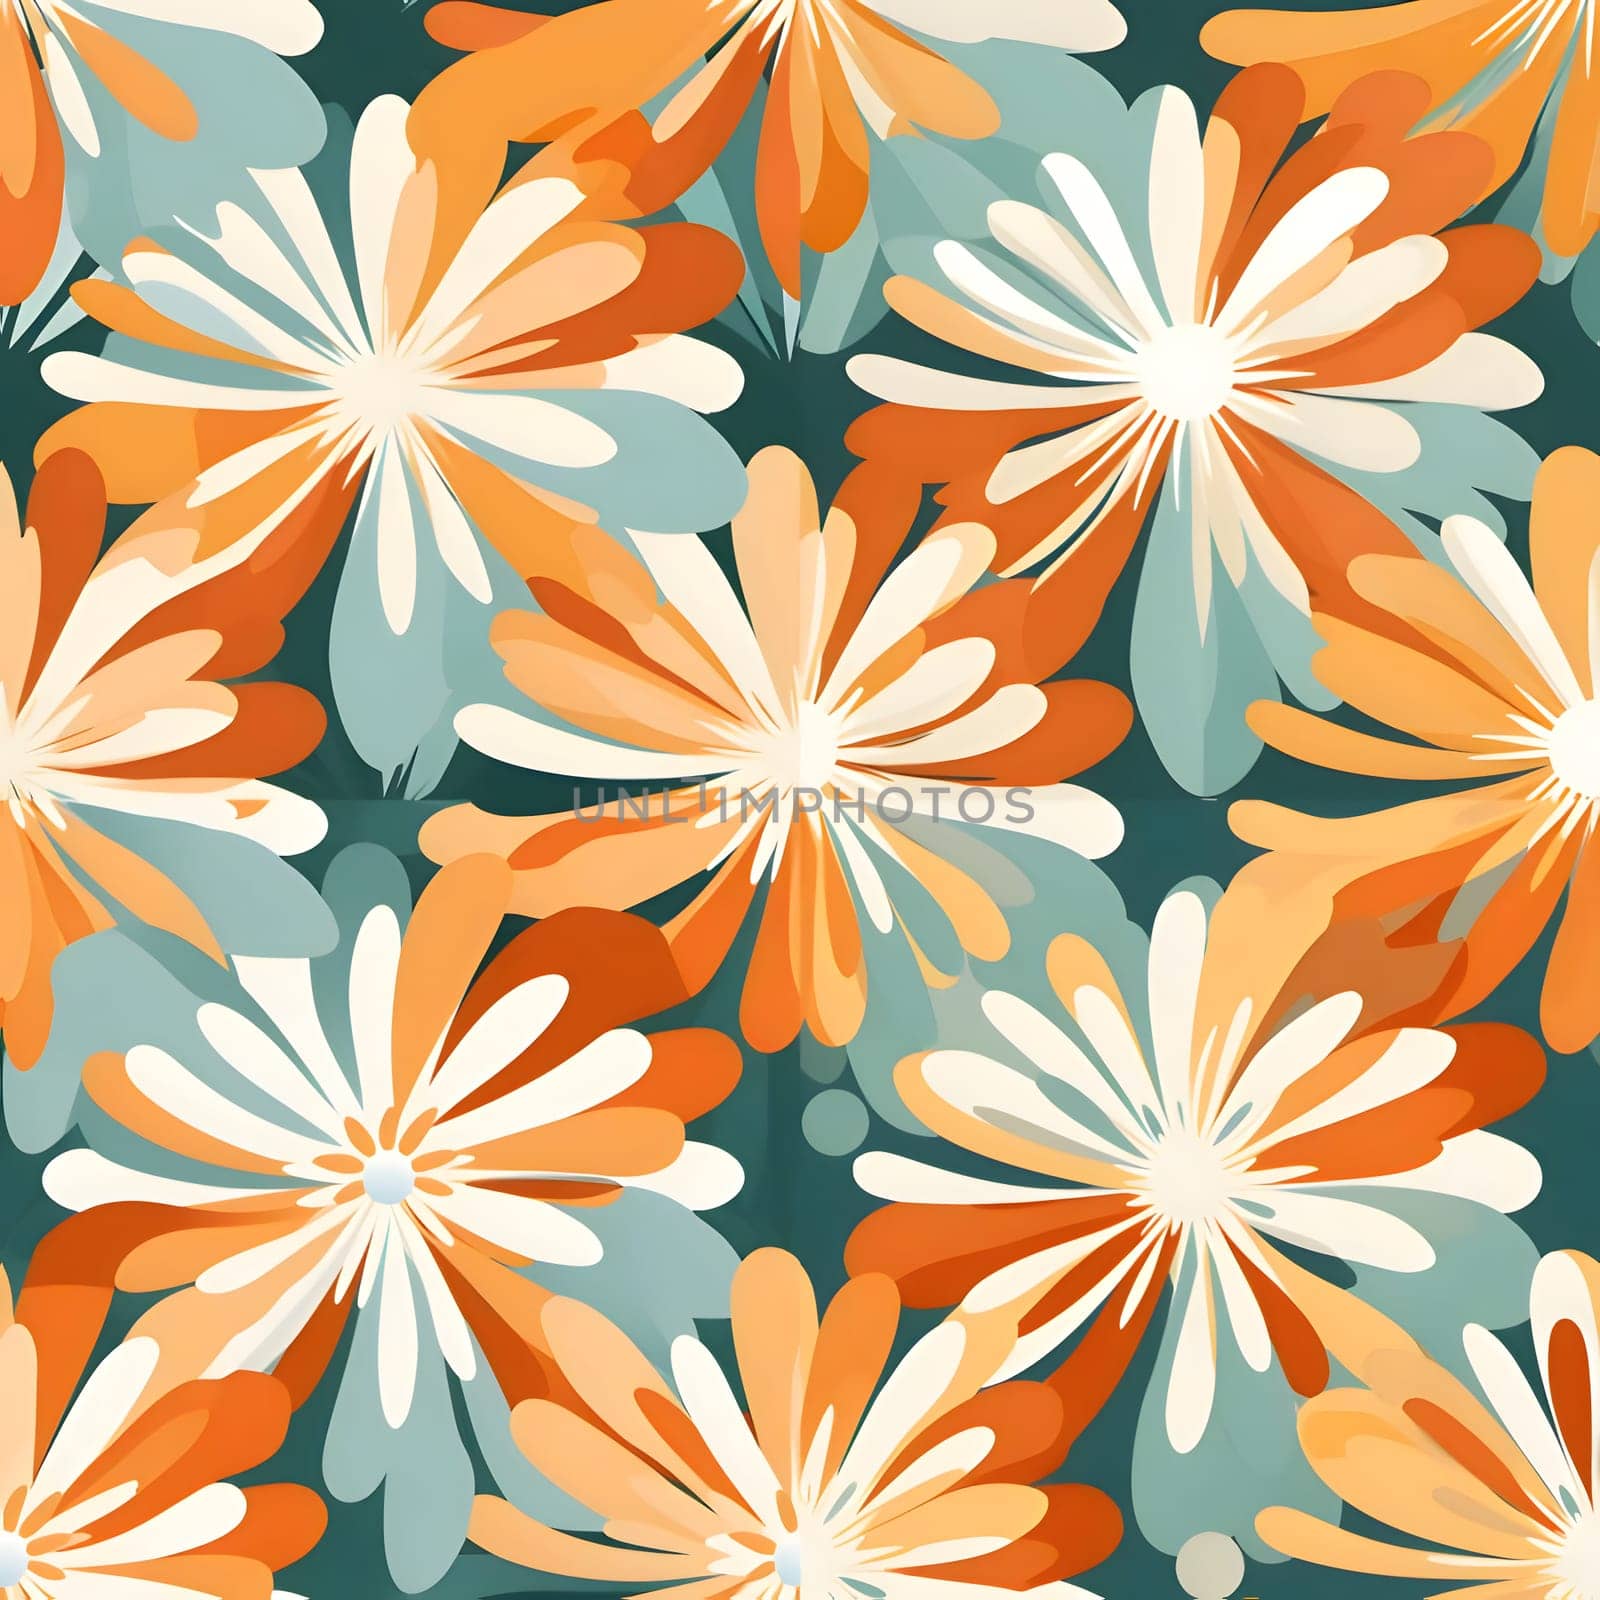 Patterns and banners backgrounds: Seamless floral pattern with daisies. Vector illustration.